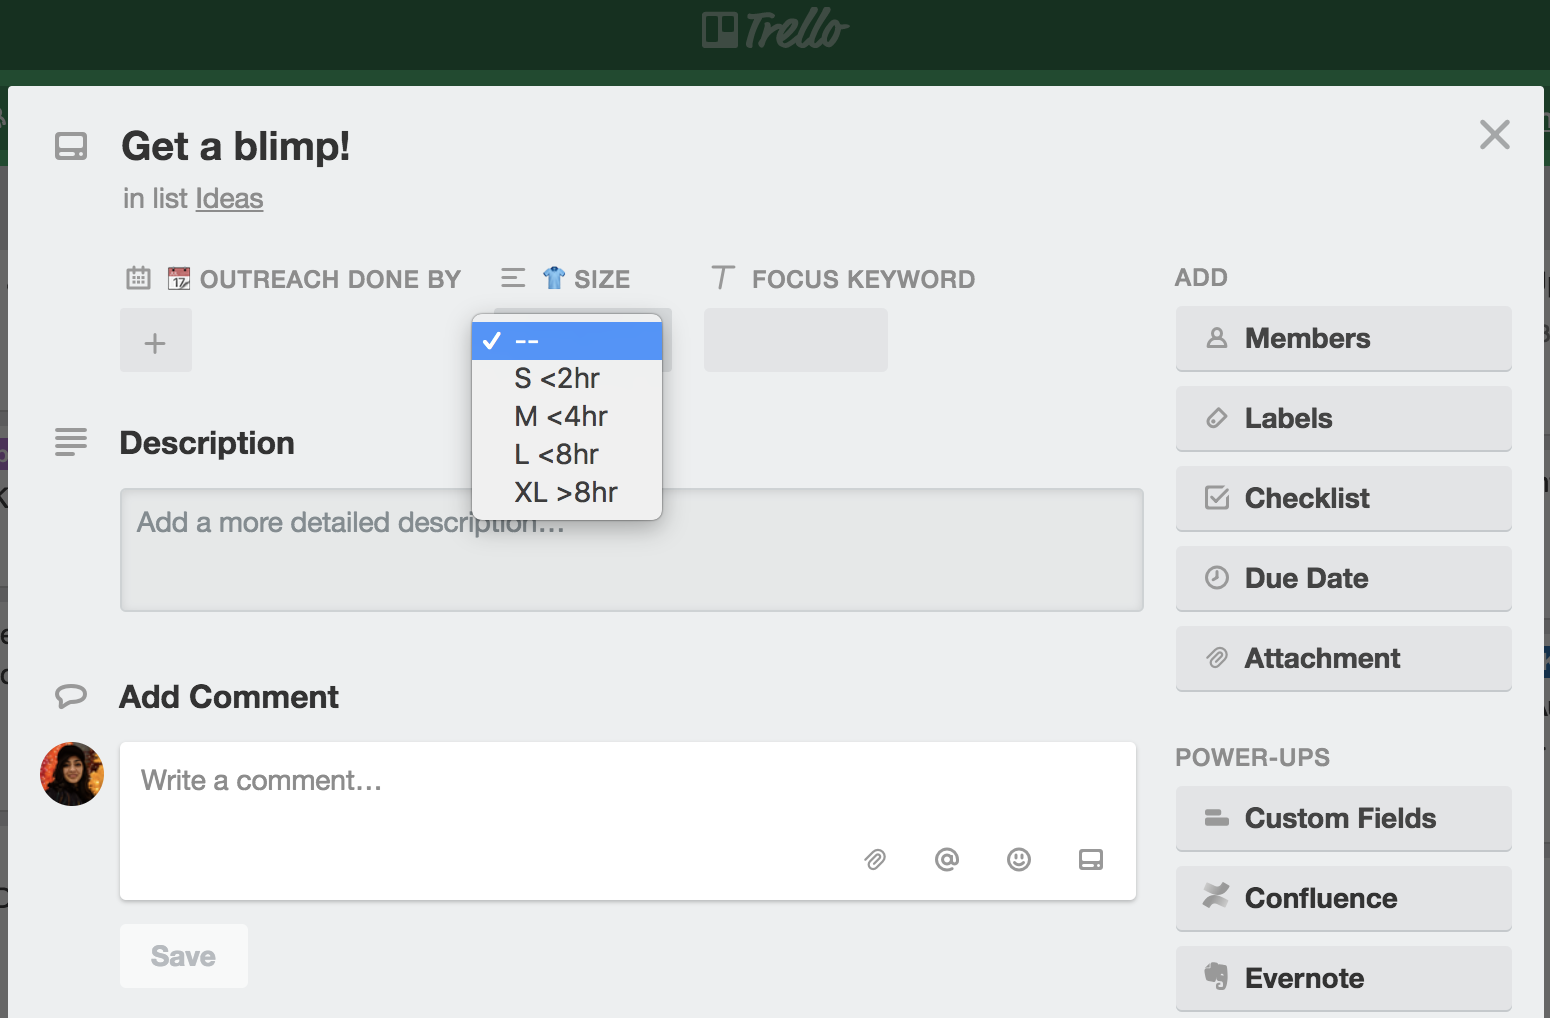 Image of Custom Fields being used in Trello